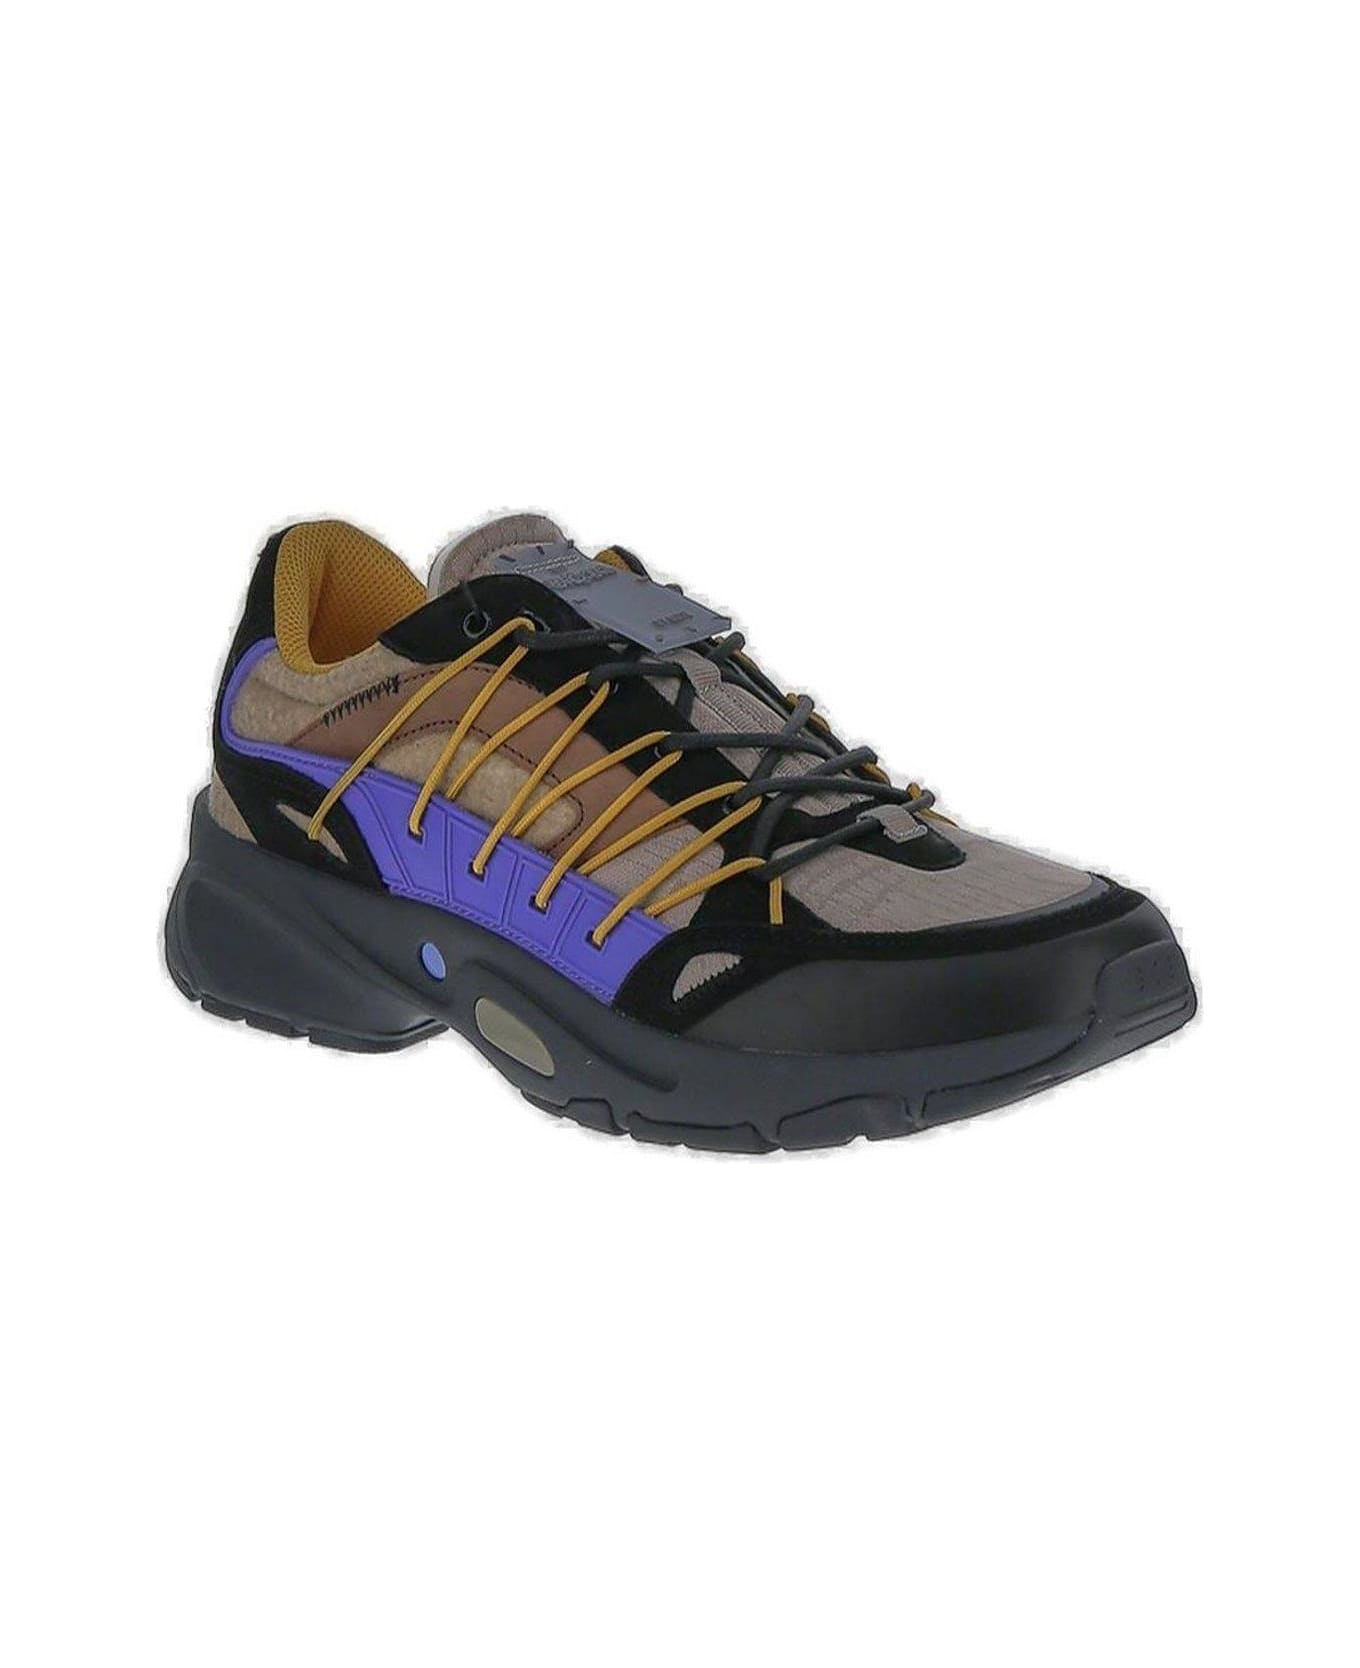 McQ Alexander McQueen B12 Aratana 1.3 Lace-up Sneakers - Multiple colors スニーカー